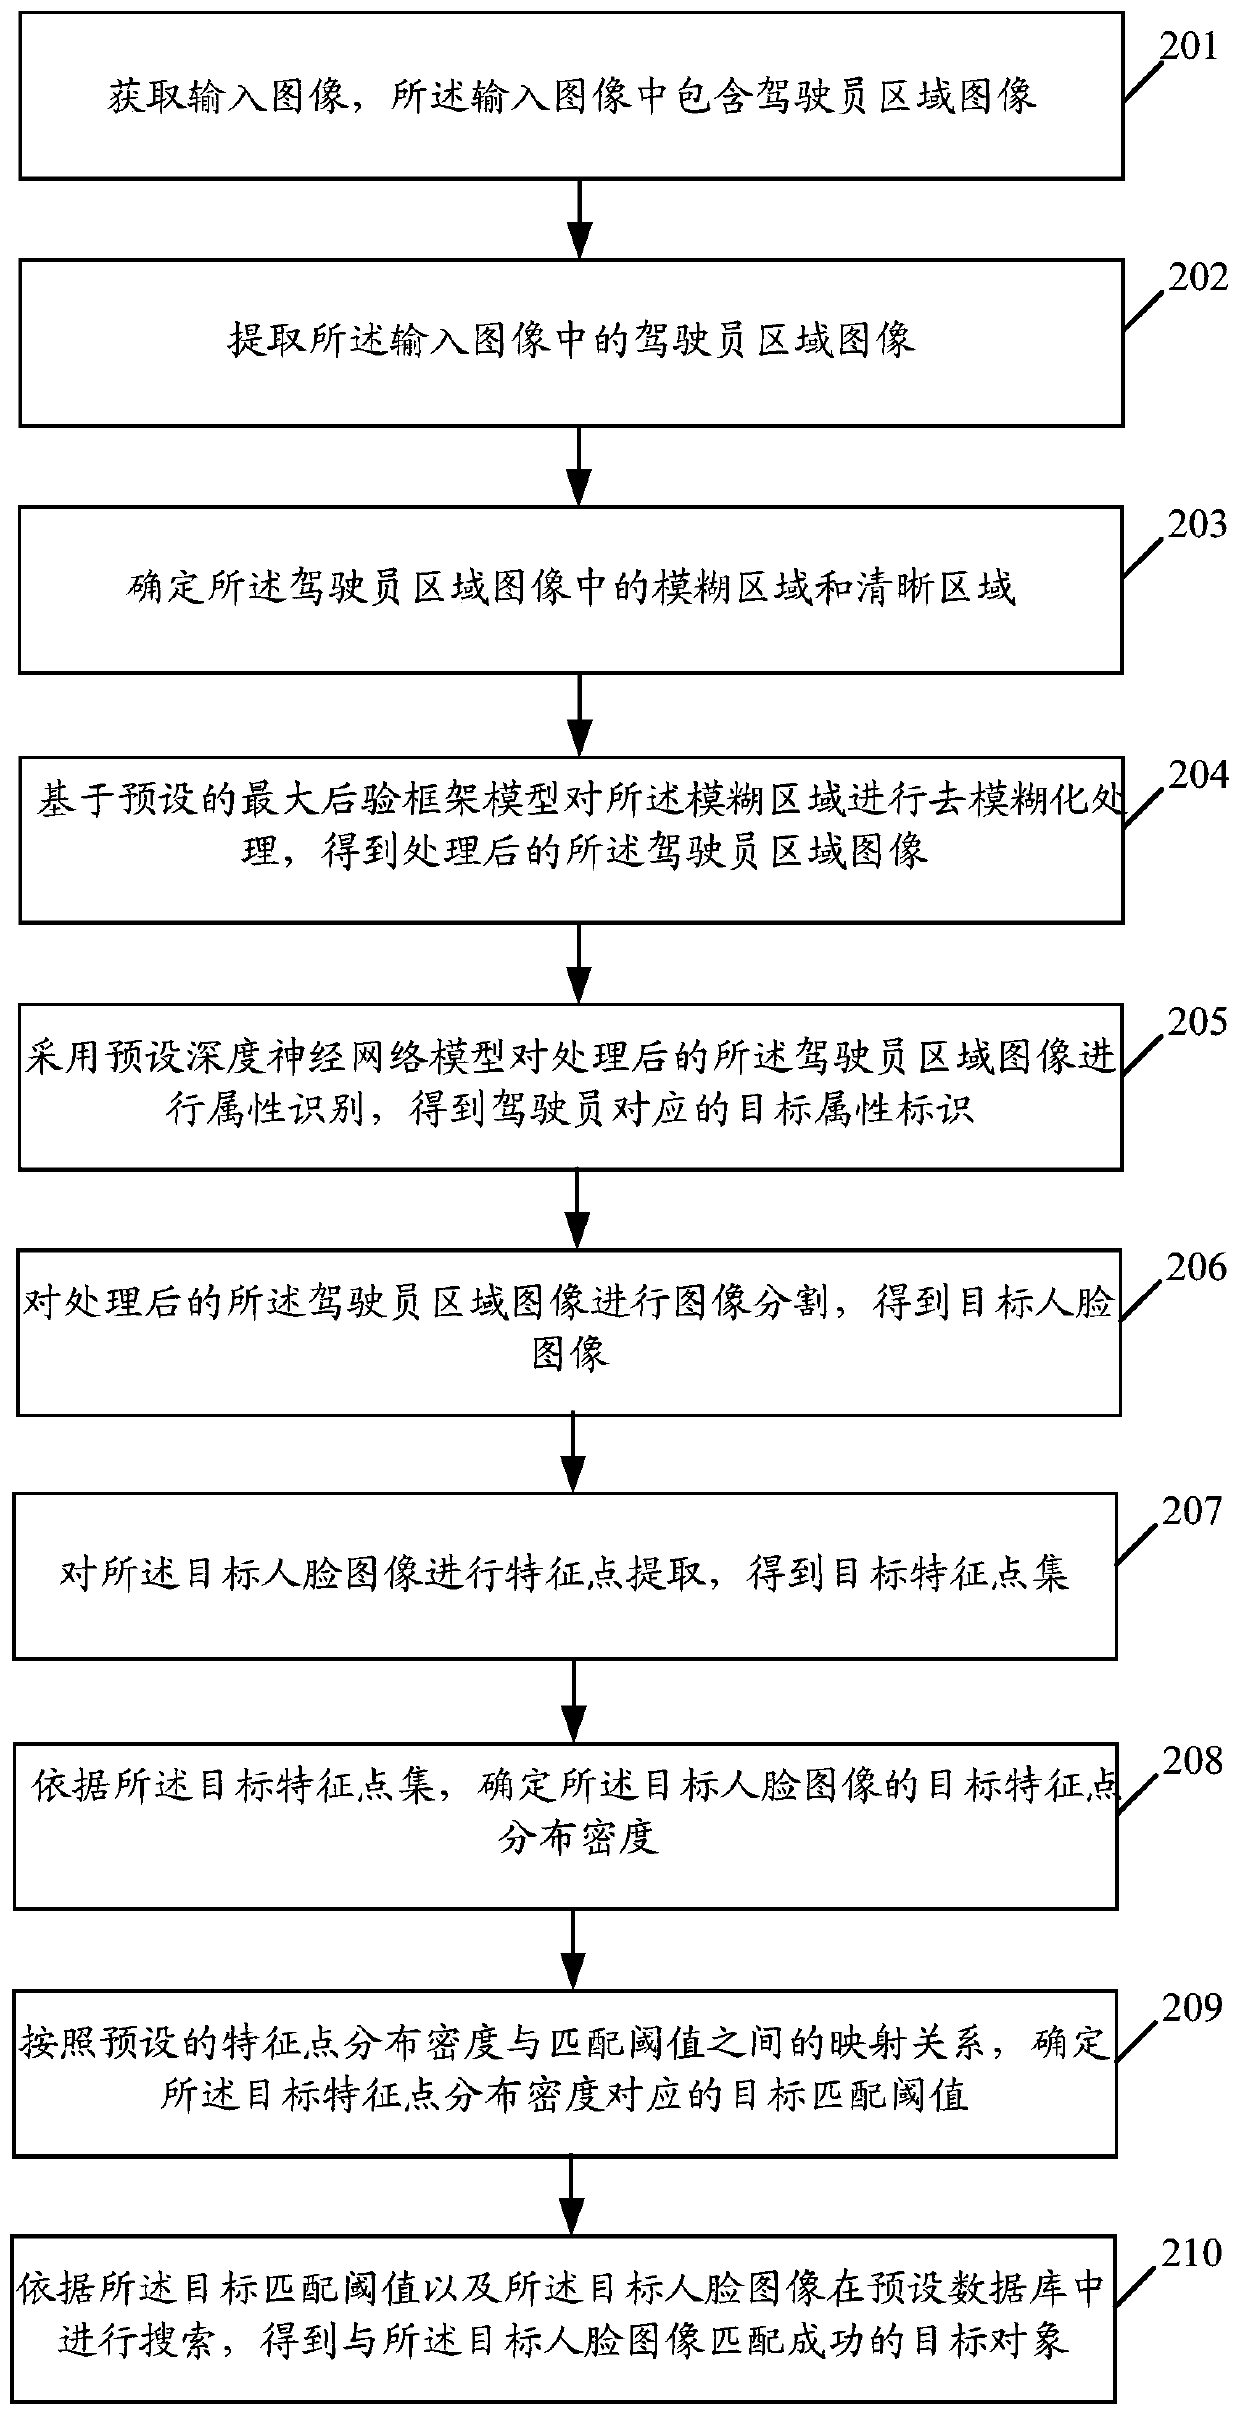 Driver attribute identification method and related products